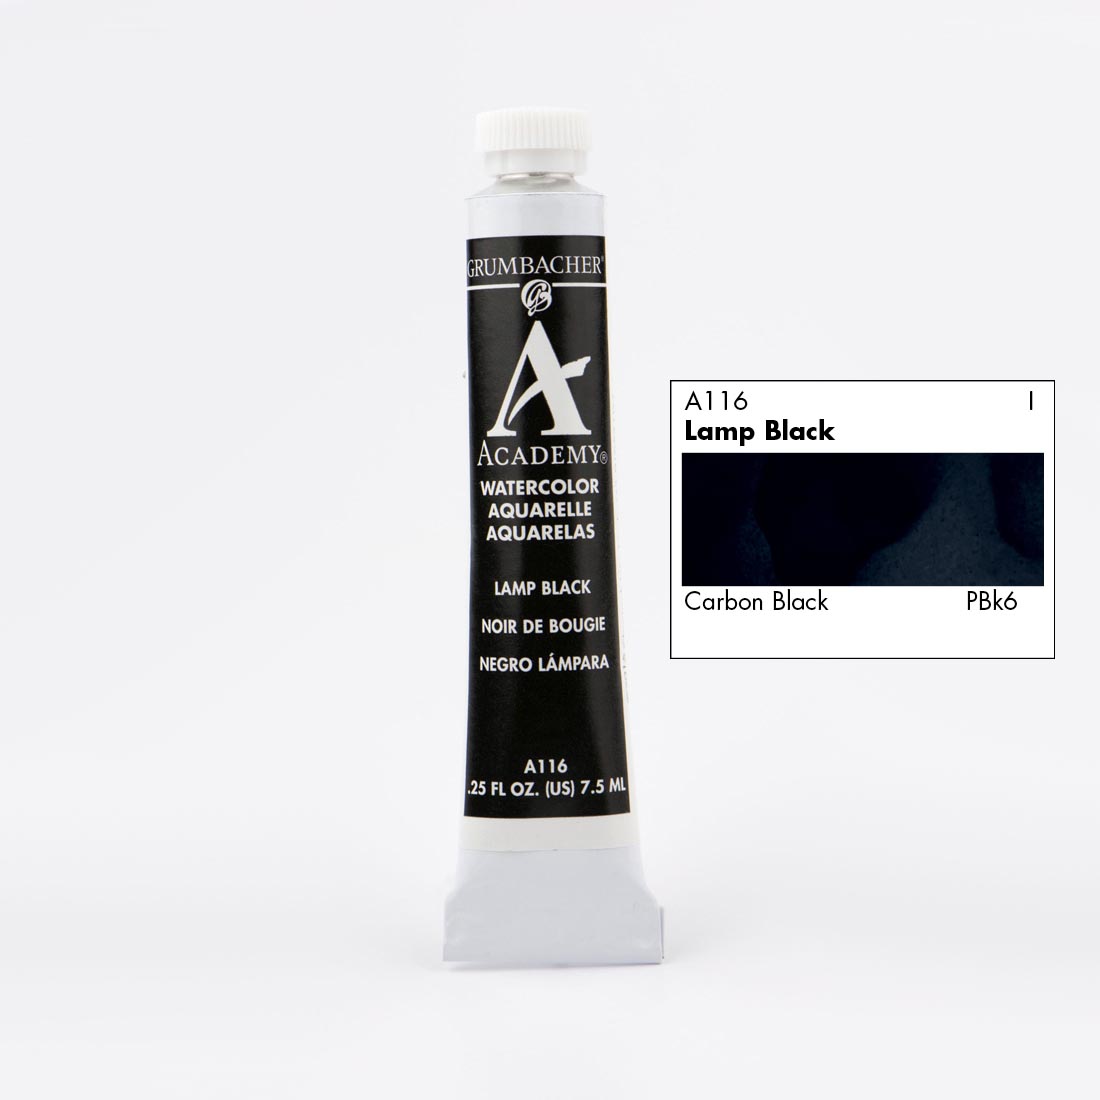 Tube of Grumbacher Academy Watercolor beside Lamp Black color swatch